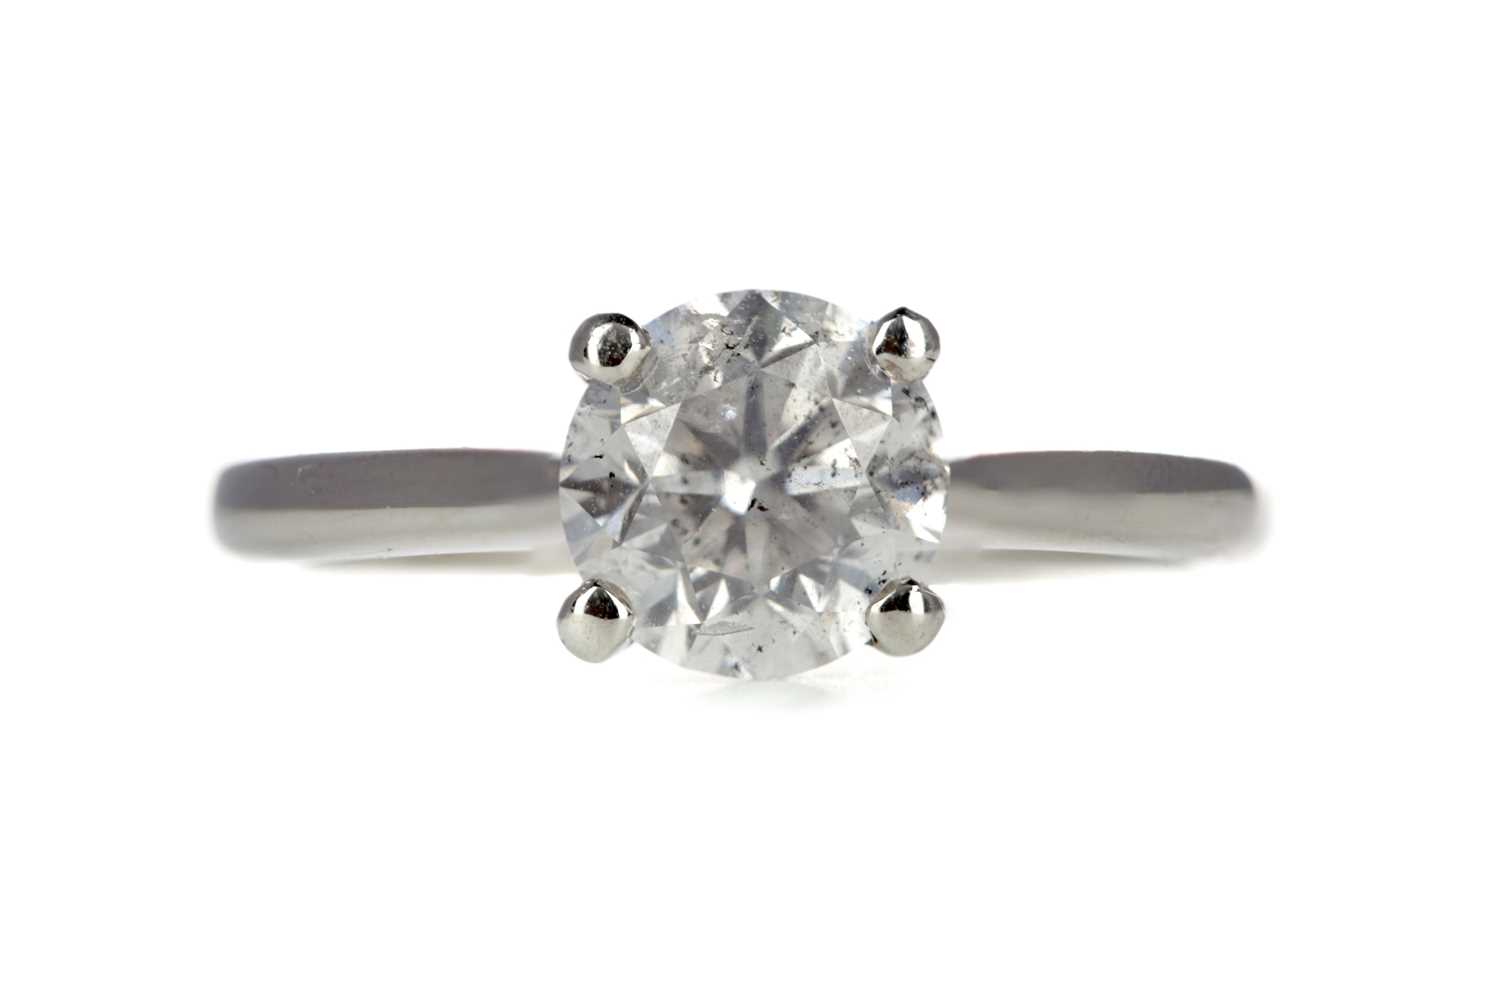 Lot 850 - A DIAMOND SOLITAIRE RING